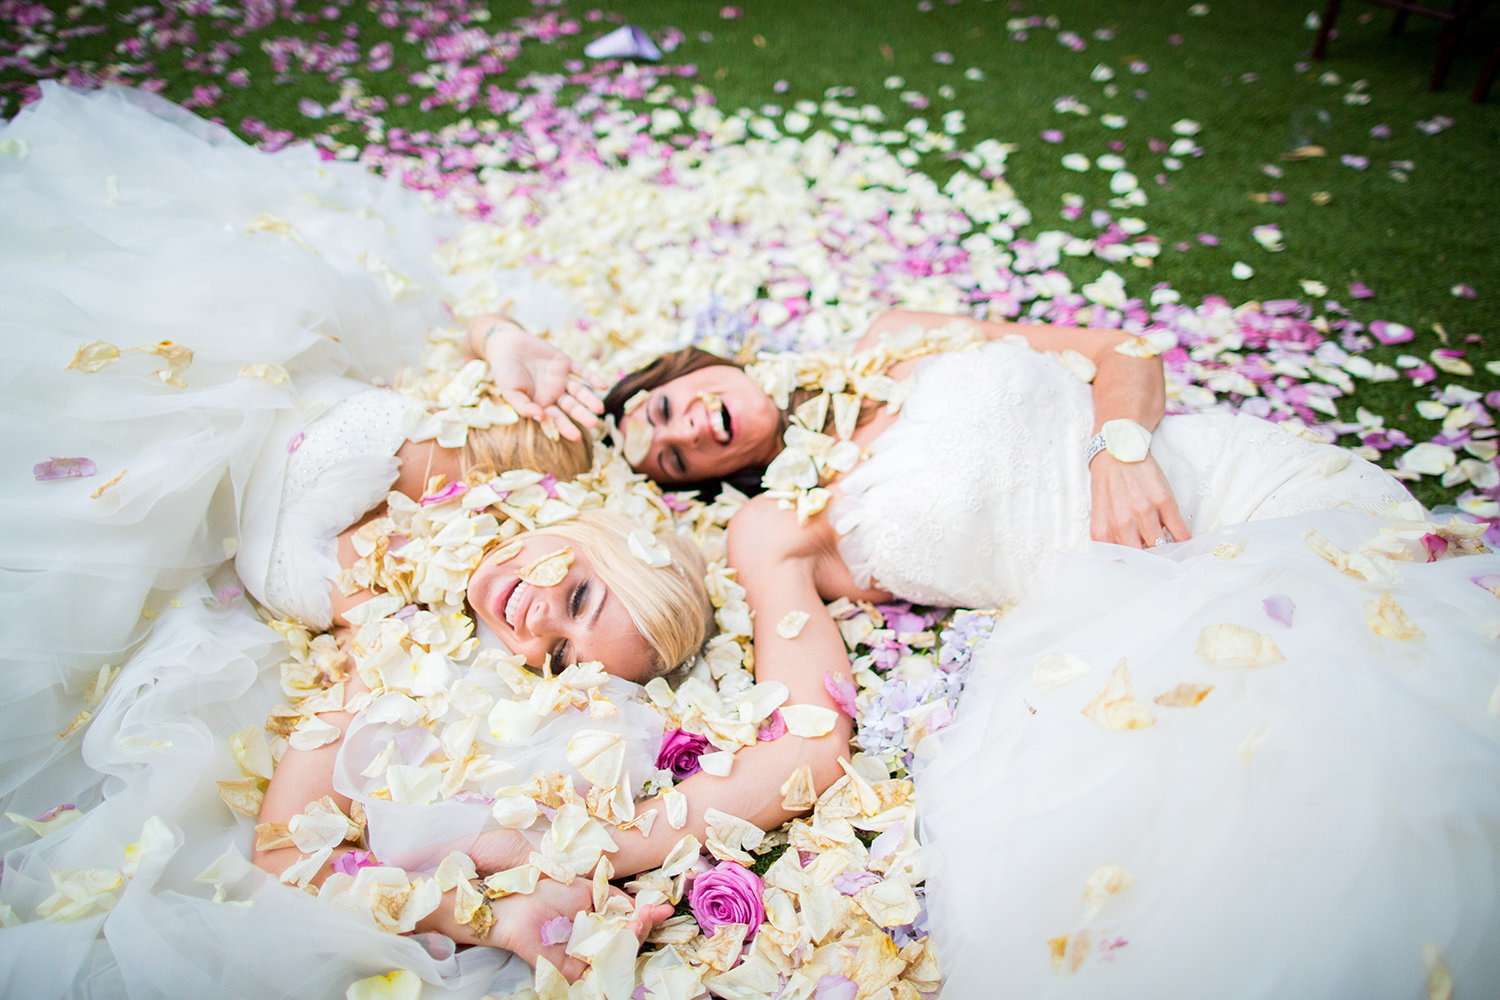 Lesbian brides laying on a bed of flower petals at their wedding